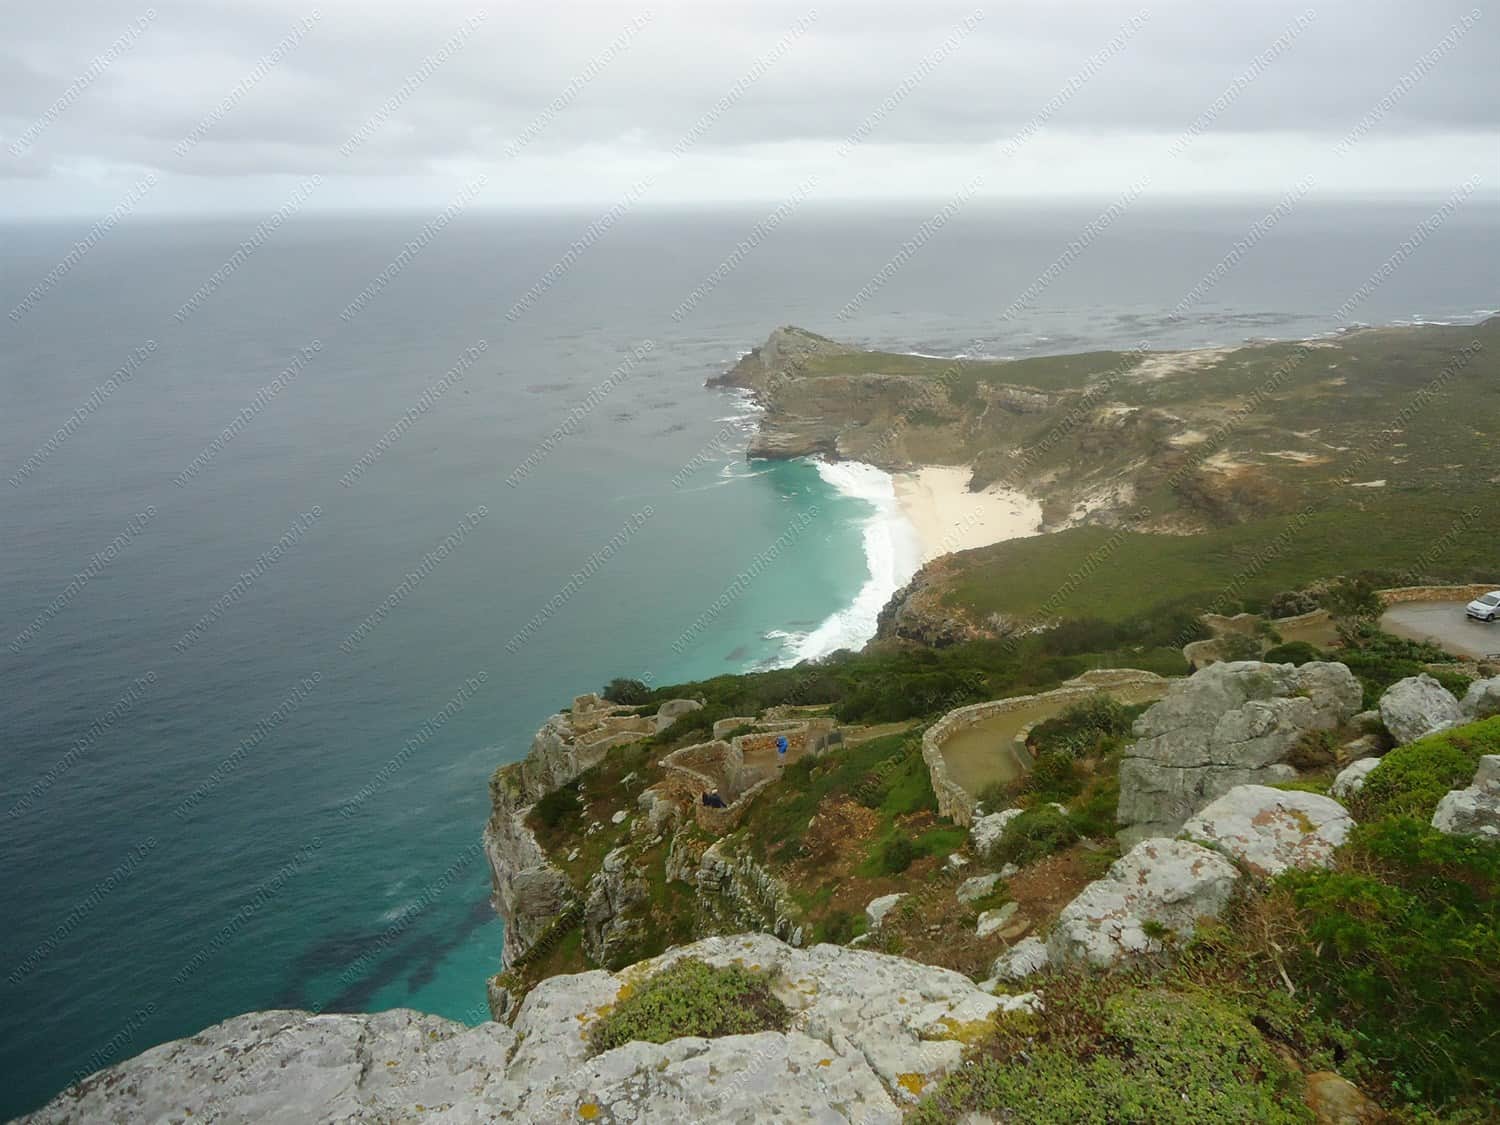 A road Trip to Cape Point